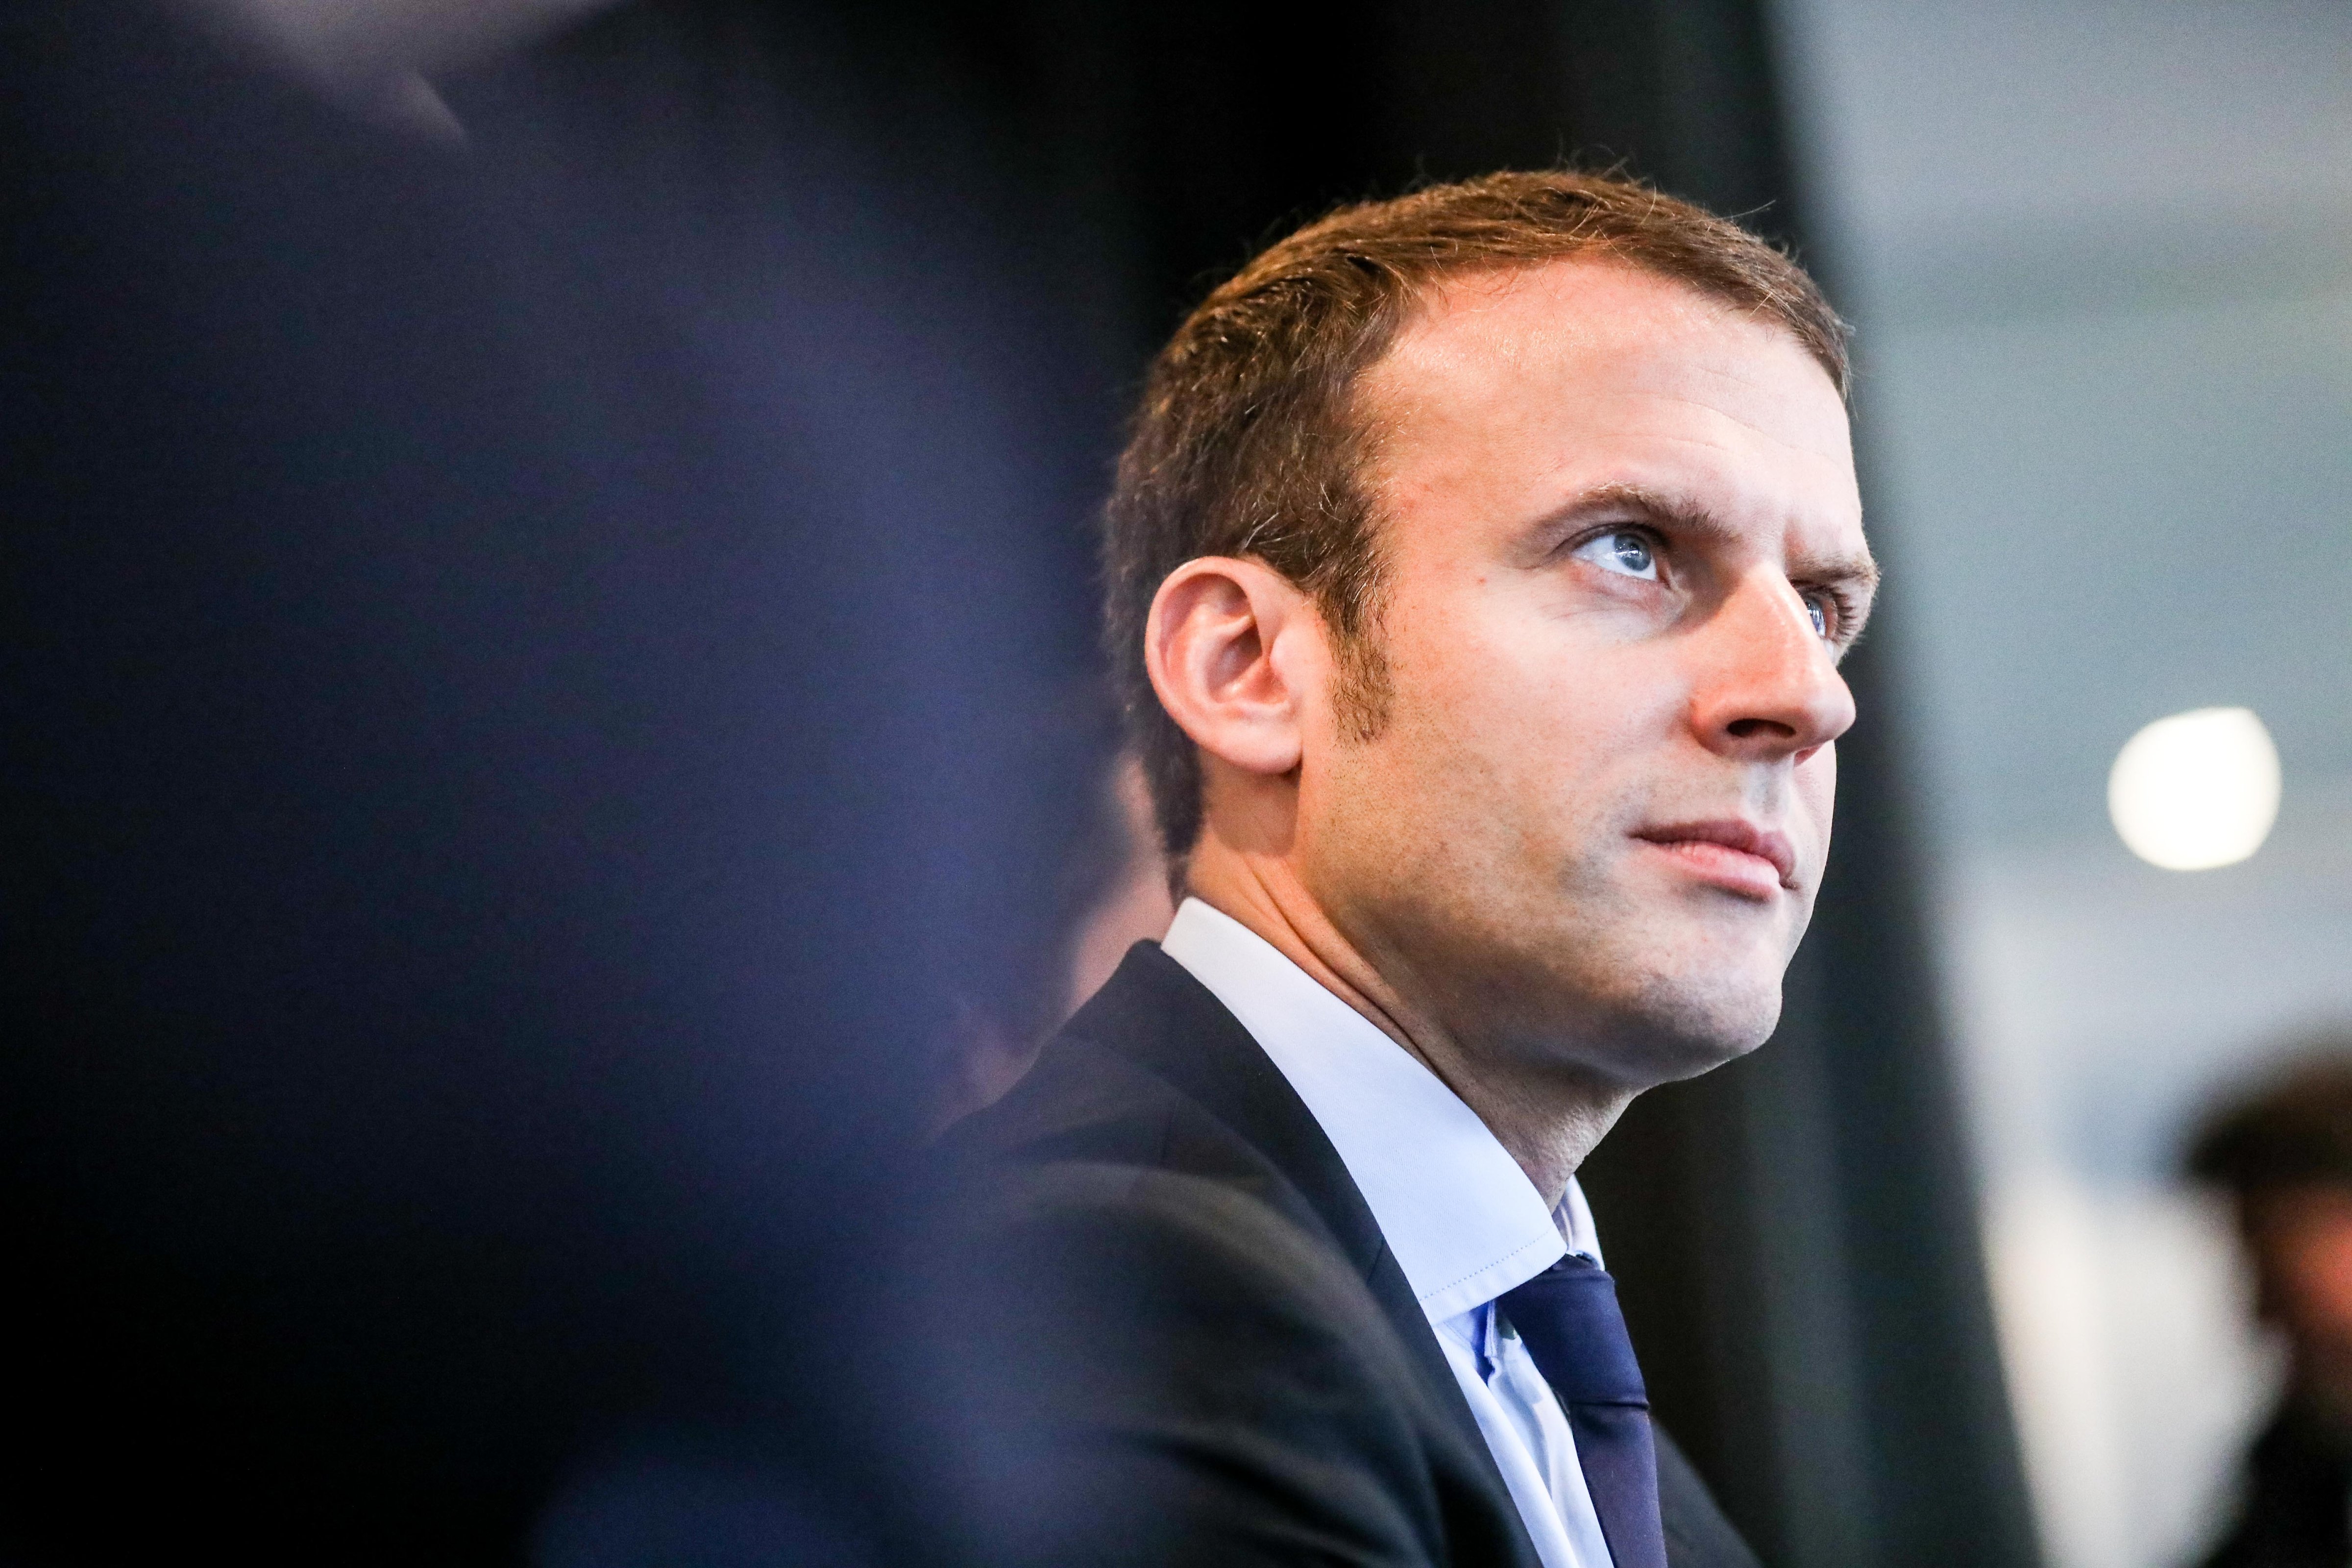 Former French Economy Minister and Founder and Leader of the political movement 'En Marche !' Emmanuel Macron holds a press conference to present the organization of his movement and the people within it on October 26, 2016 in Paris, France. (Christophe Morin—Getty Images)